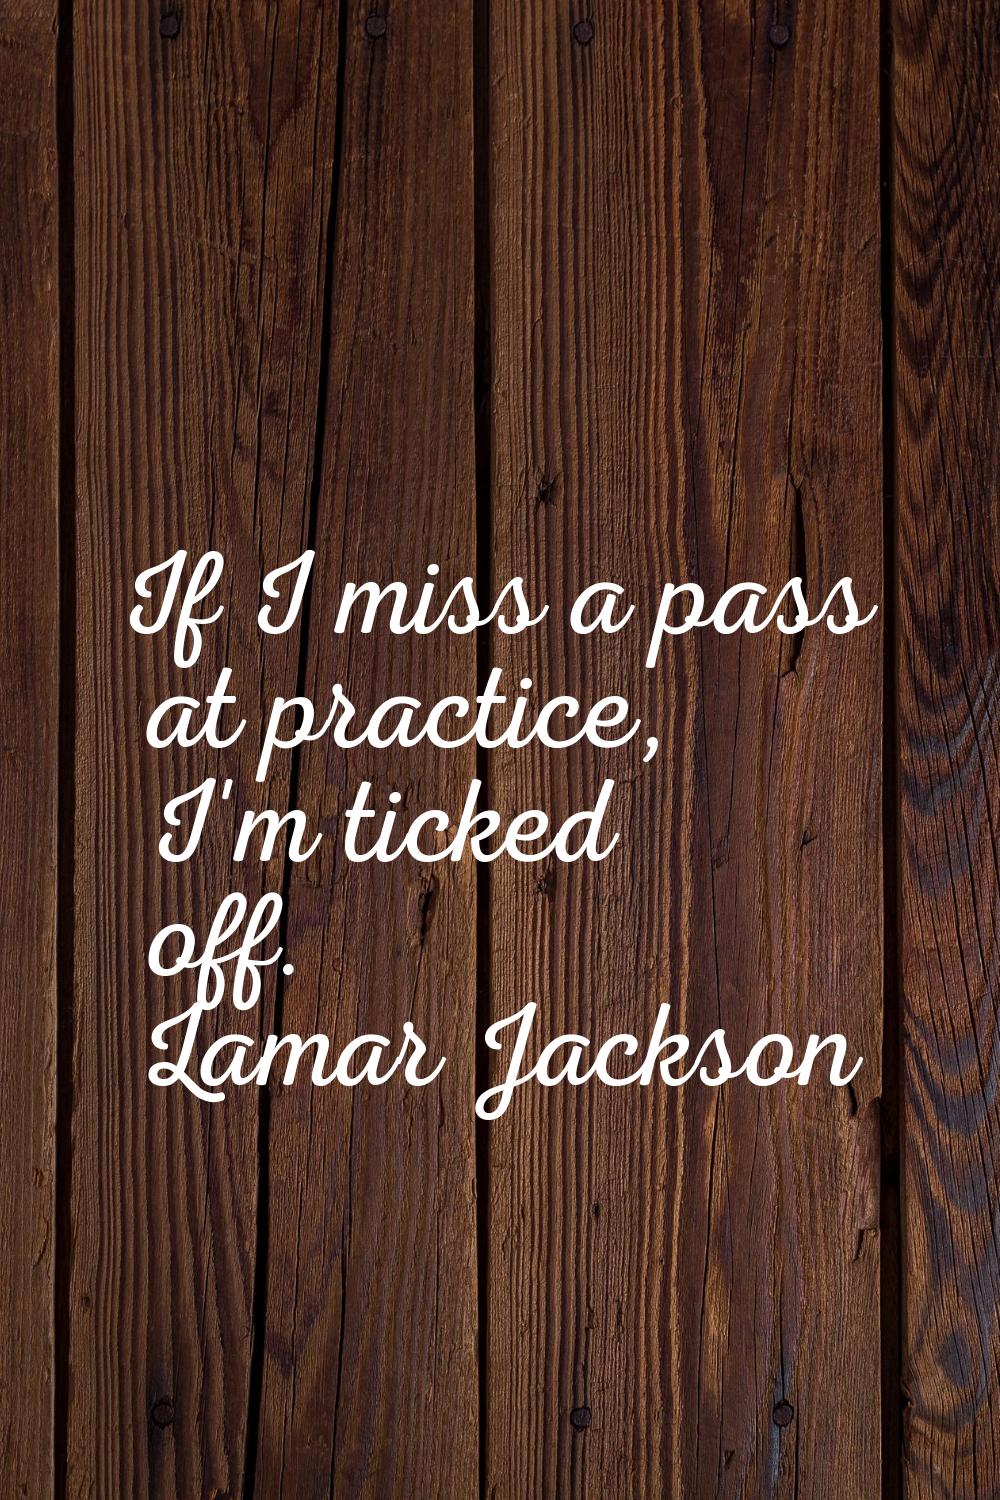 If I miss a pass at practice, I'm ticked off.